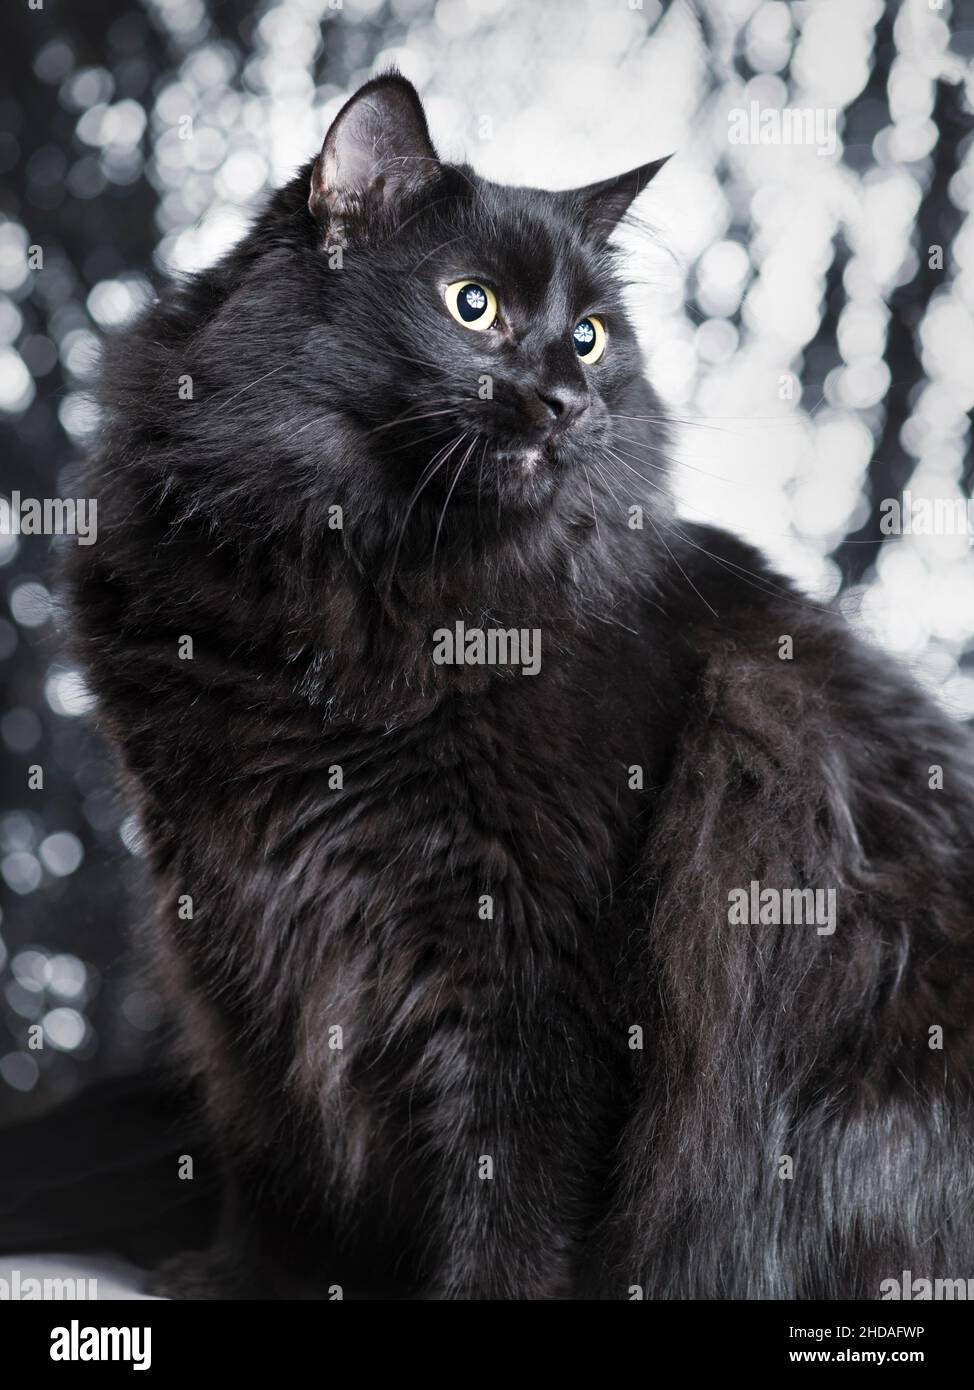 Pretty long haired black cat. Stock Photo